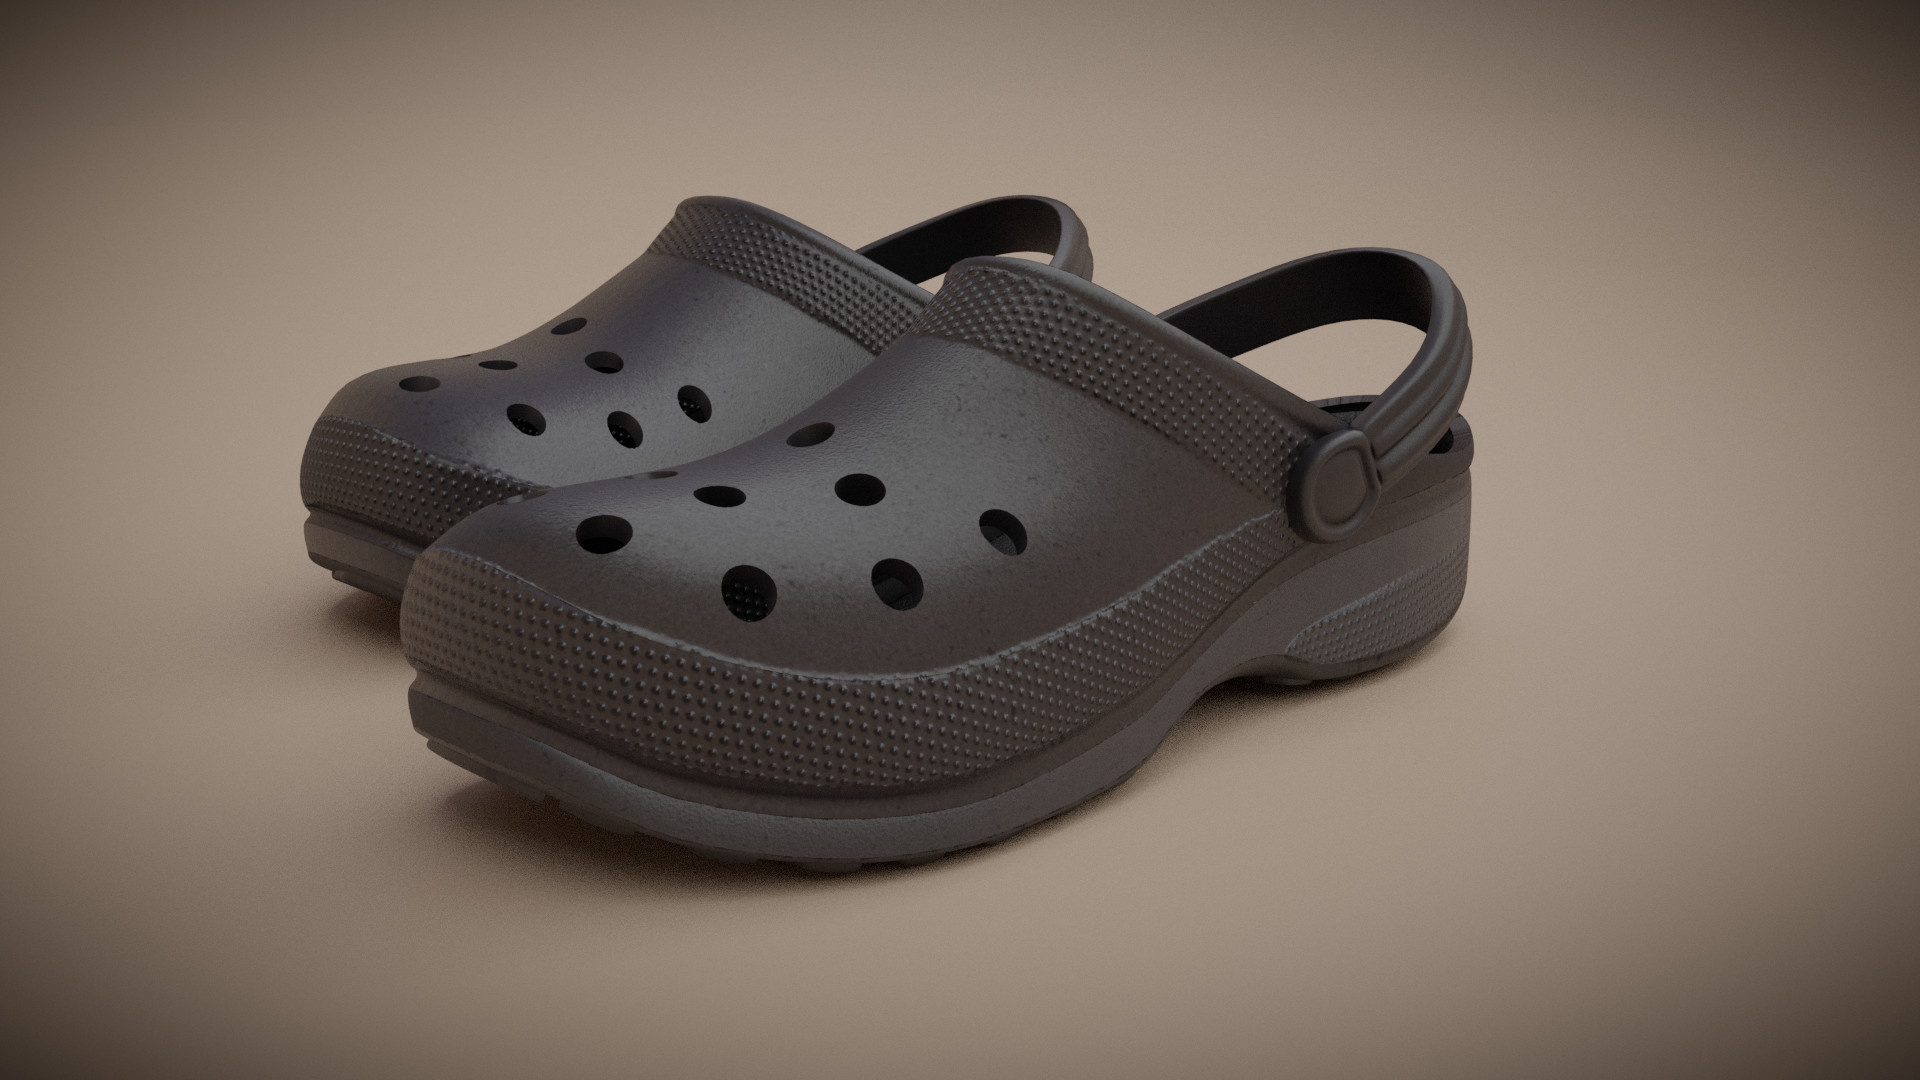 Crocs: A footwear company based in Broomfield, Colorado, Functional shoes. 1920x1080 Full HD Background.